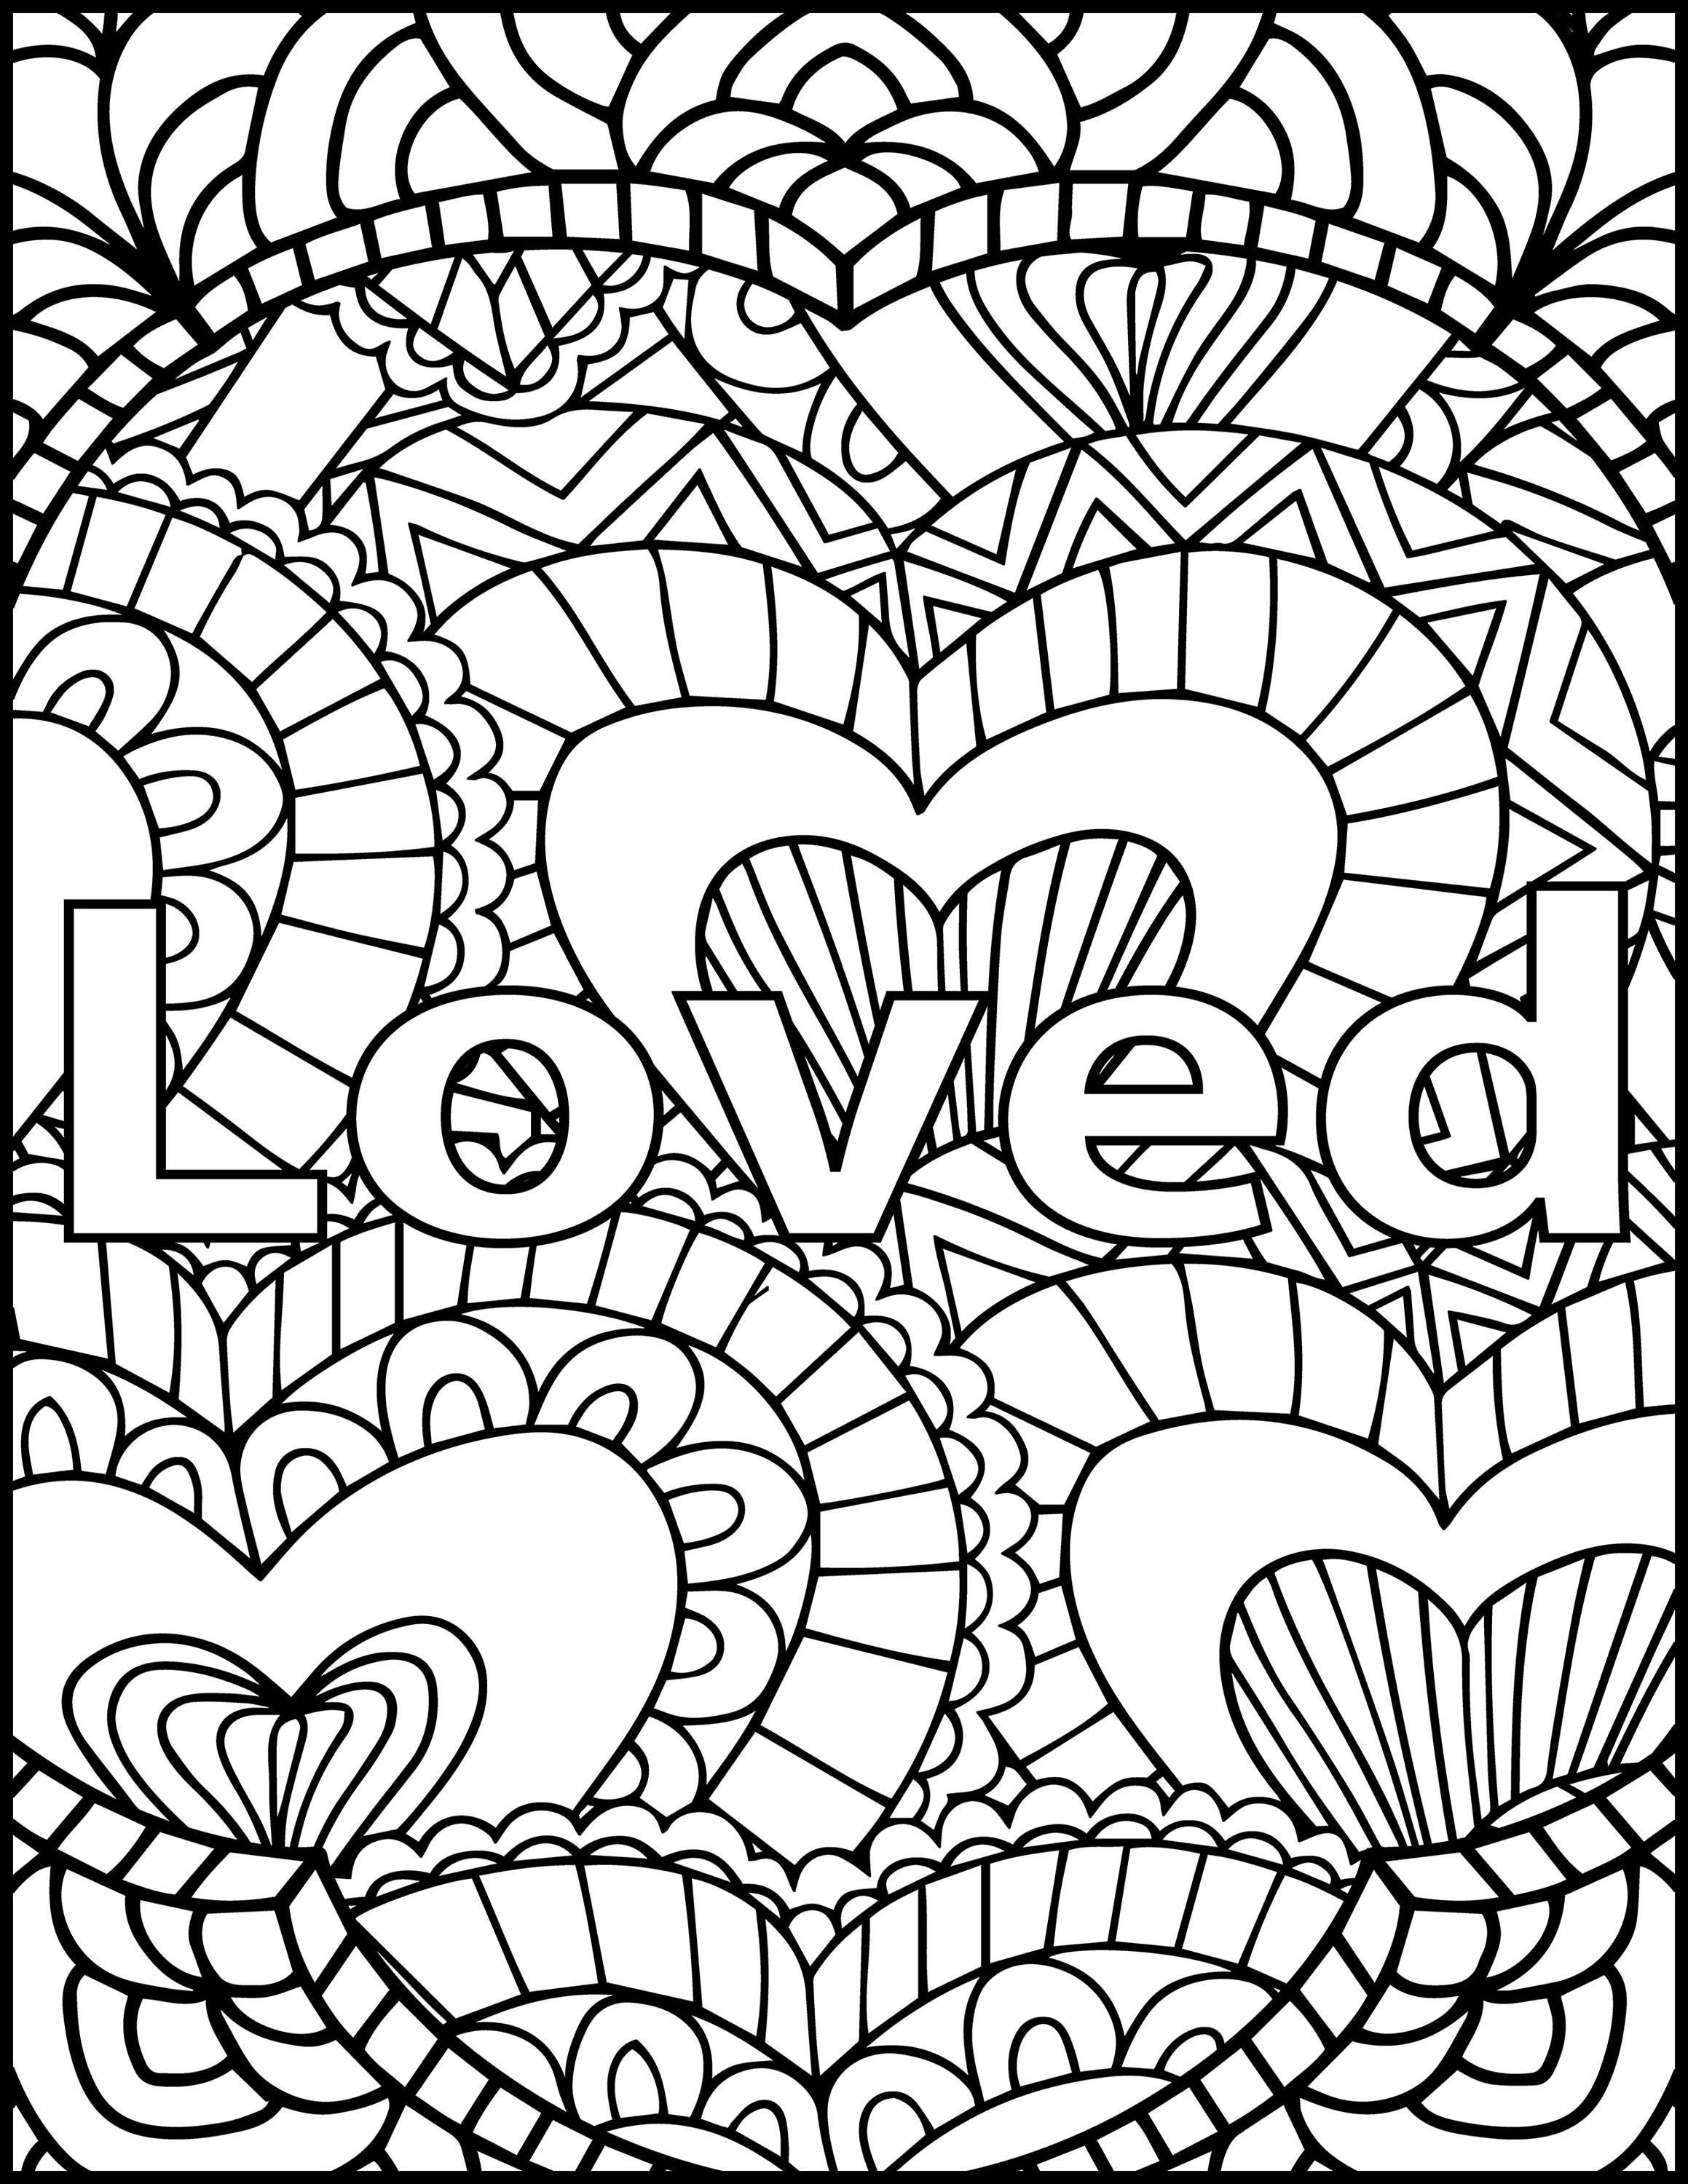 I Am Loved Adult Coloring Page Inspiring Message Coloring